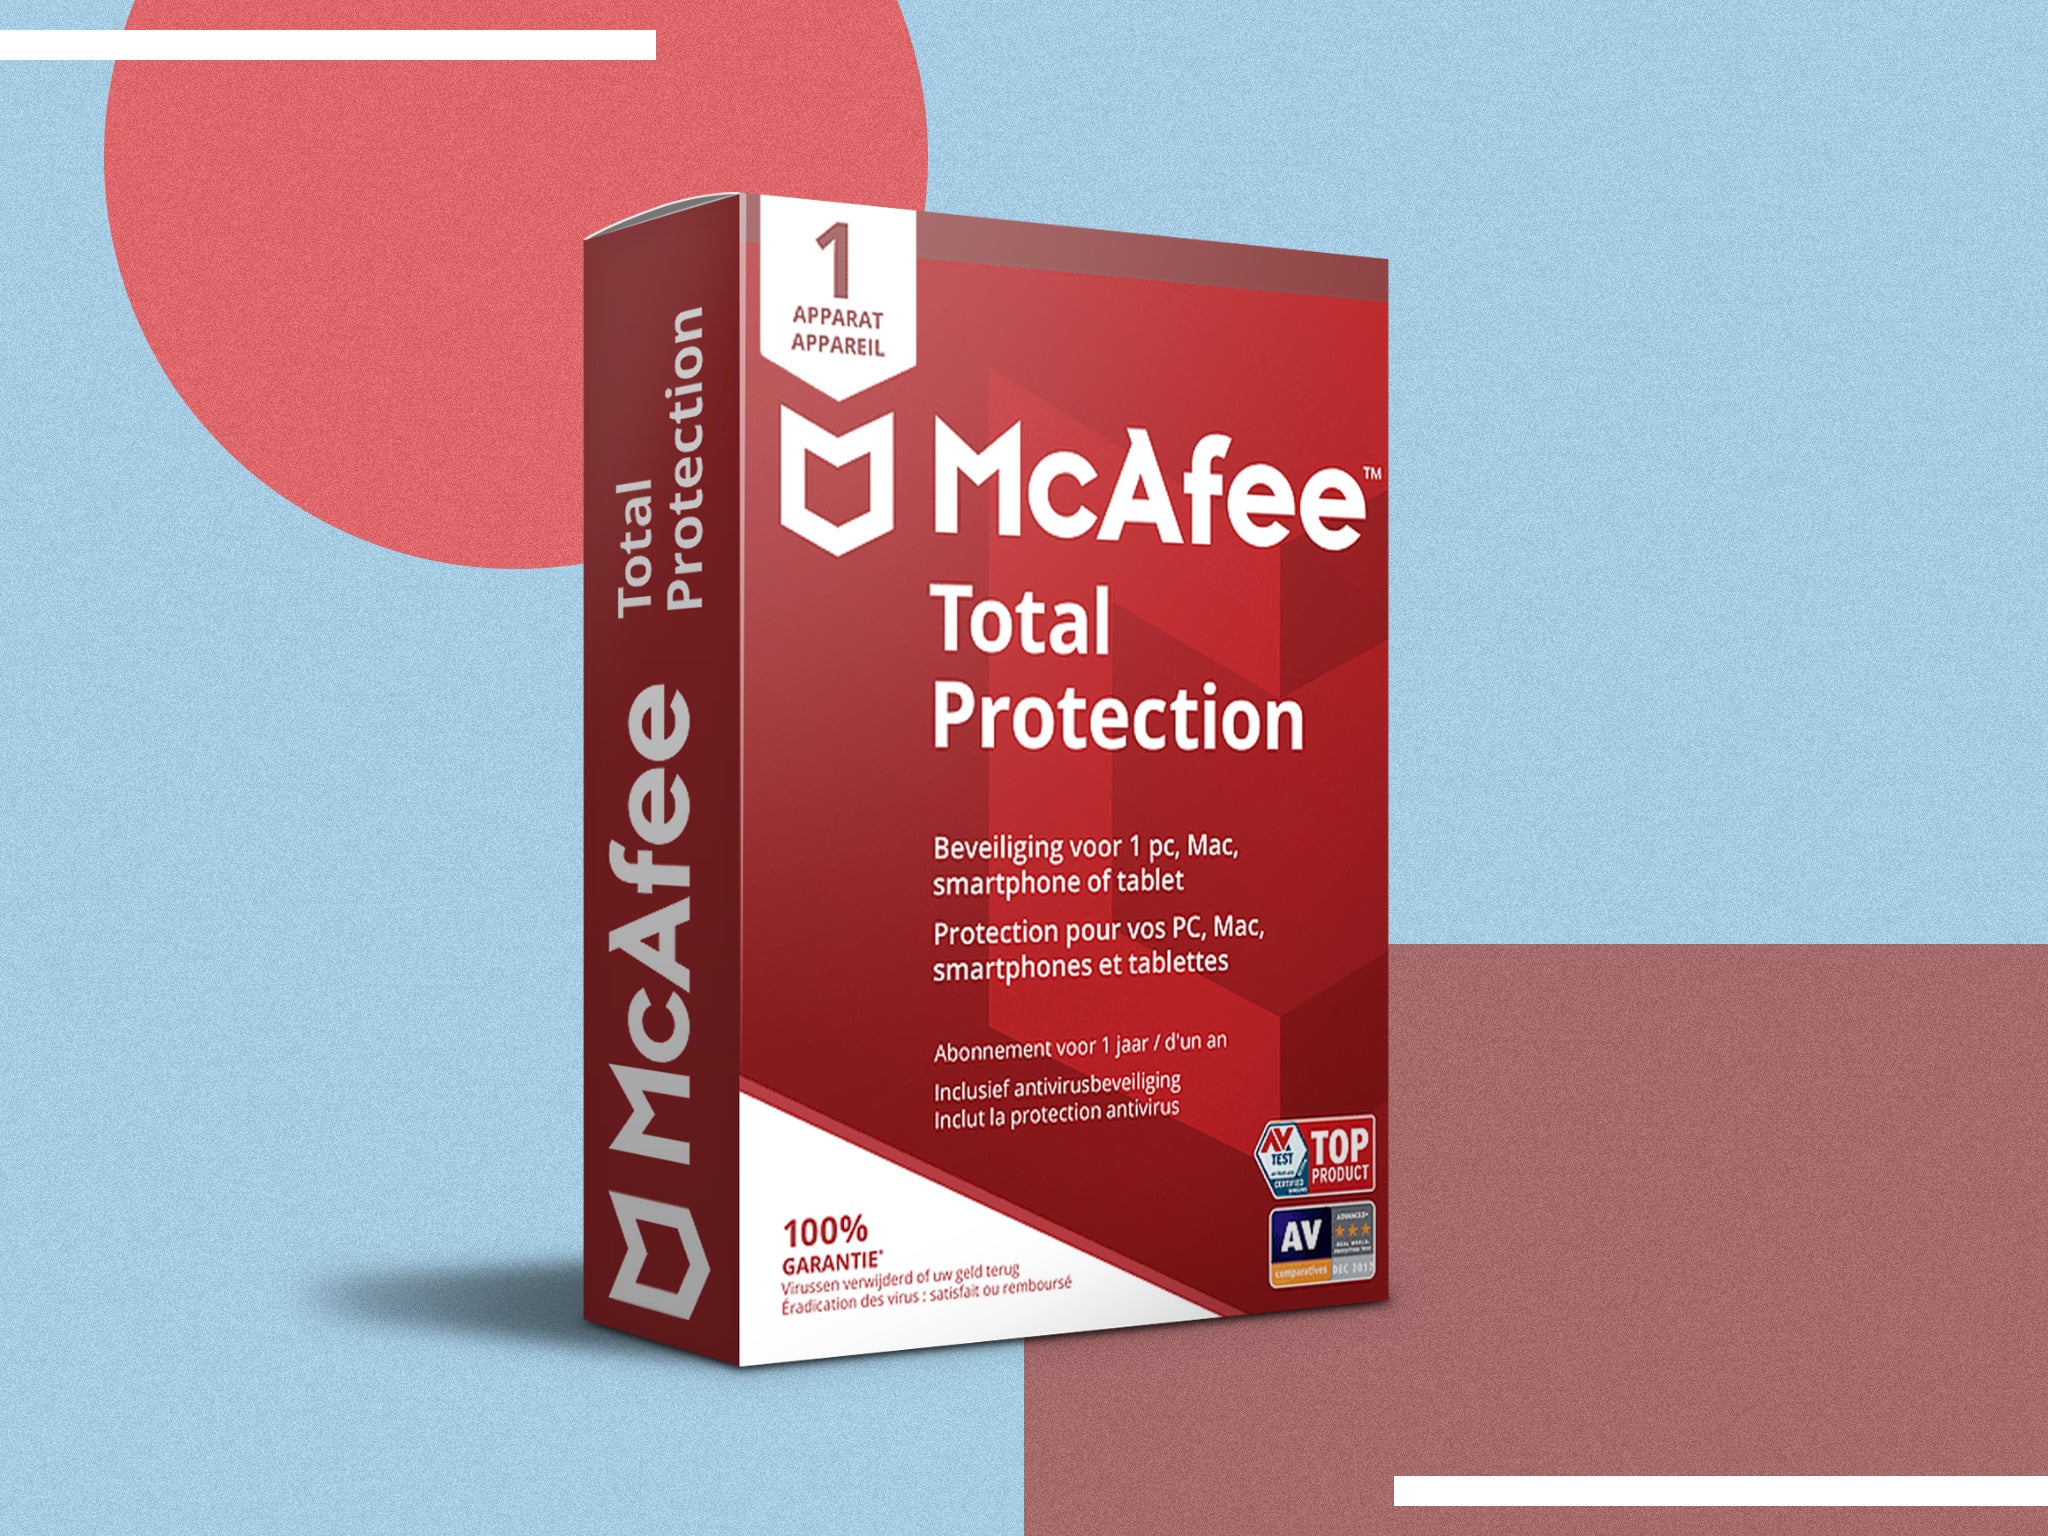 McAfee total protection review 2021: Antivirus and security